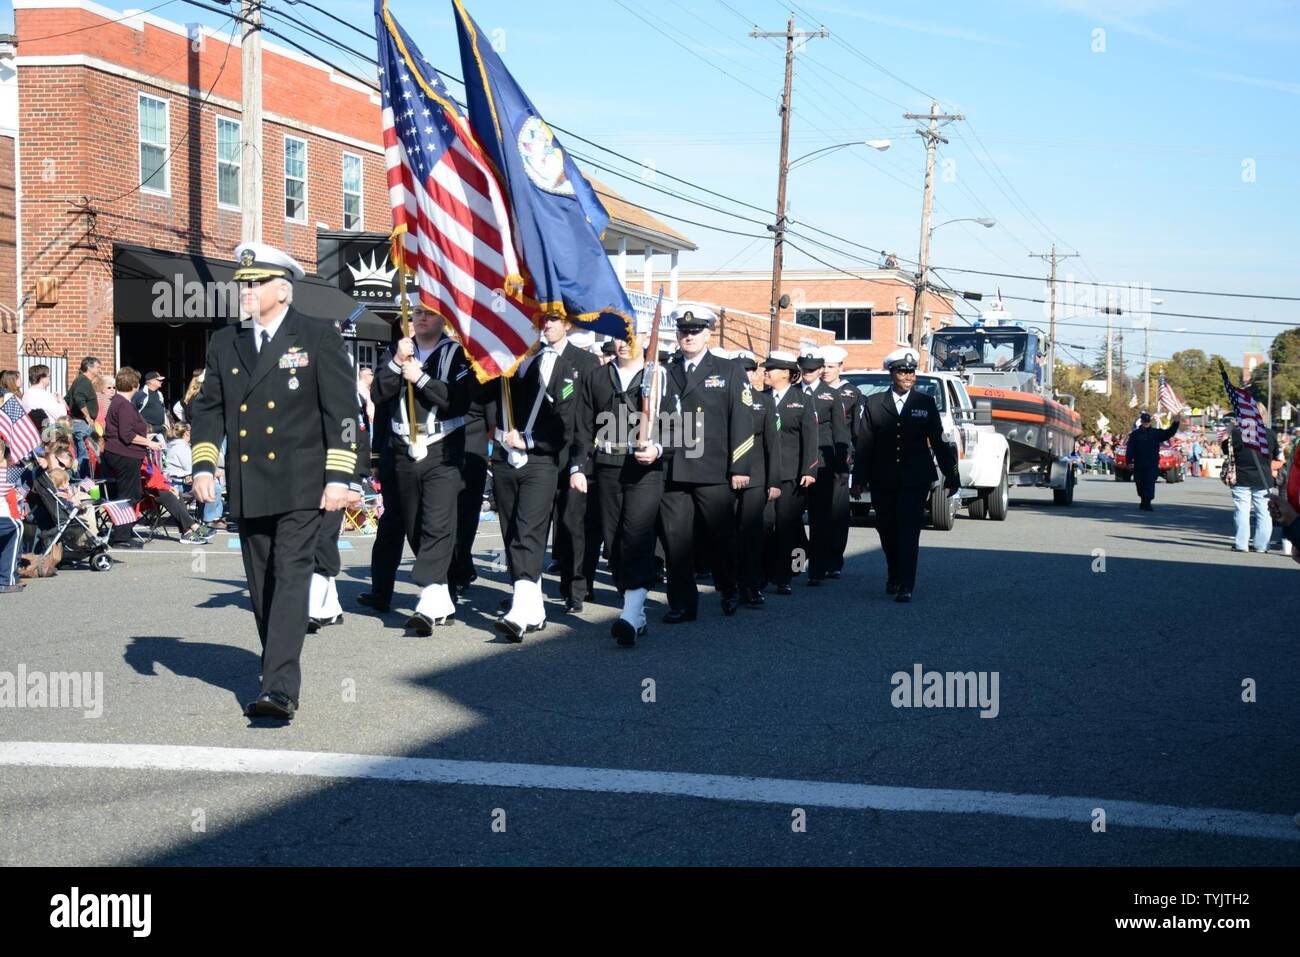 LEONARDTOWN, Md. (Nov. 11, 2016) - Capt. Scott Starkey, Naval Air Station Patuxent River commanding officer, leads Sailors from the installation in the Leonardtown Veterans Day Parade in downtown Leonardtown, Md. Nov. 11. Personnel from Naval Air Station Patuxent River joined members of the local community in the largest parade in the state of Maryland which closed with statements from local elected officials and Starkey. Stock Photo